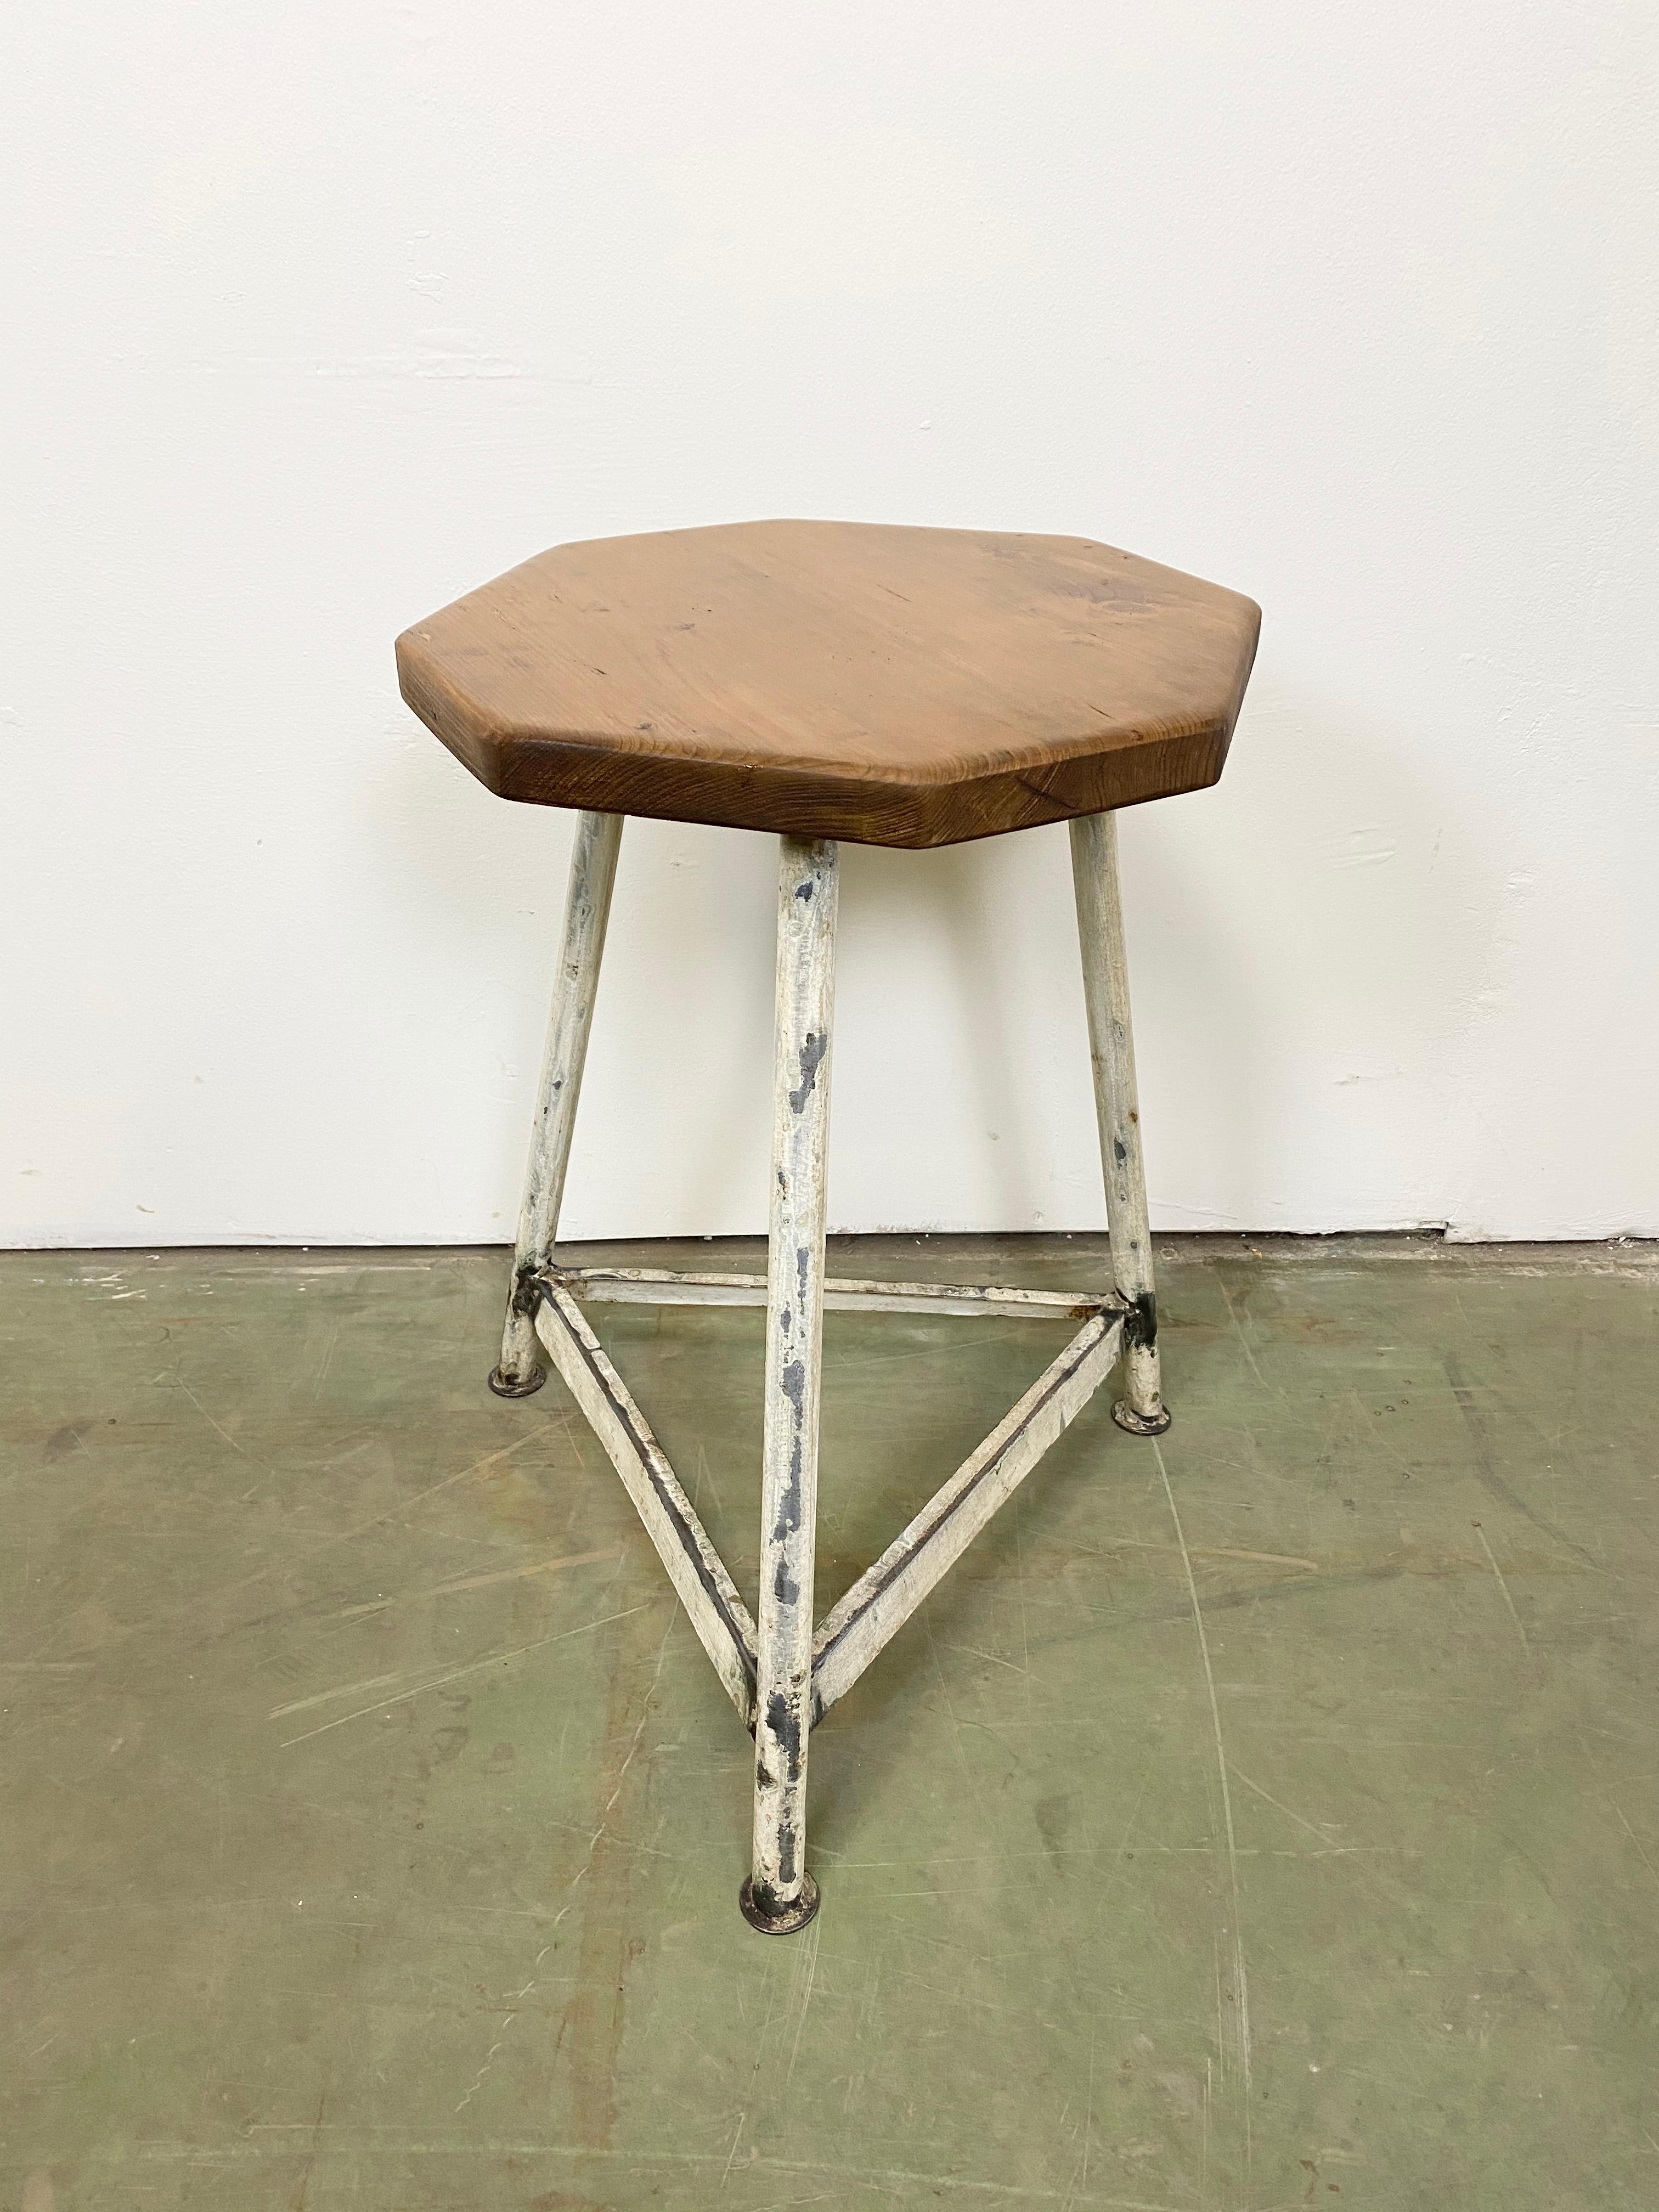 Industrial stool with a wooden seat and white metal frame. The weight of the stool is 3,5 kg.